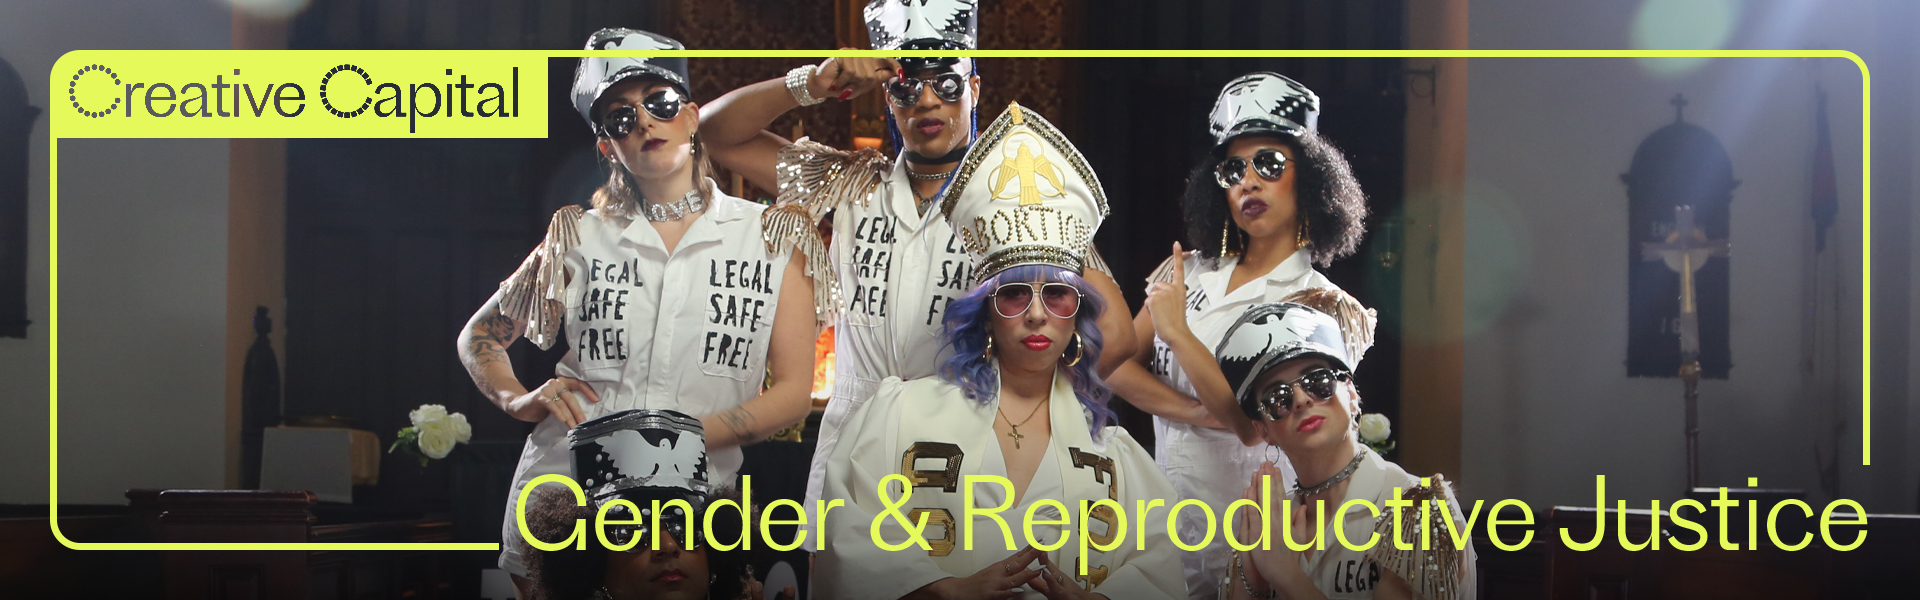 Gender & Reproductive Justice